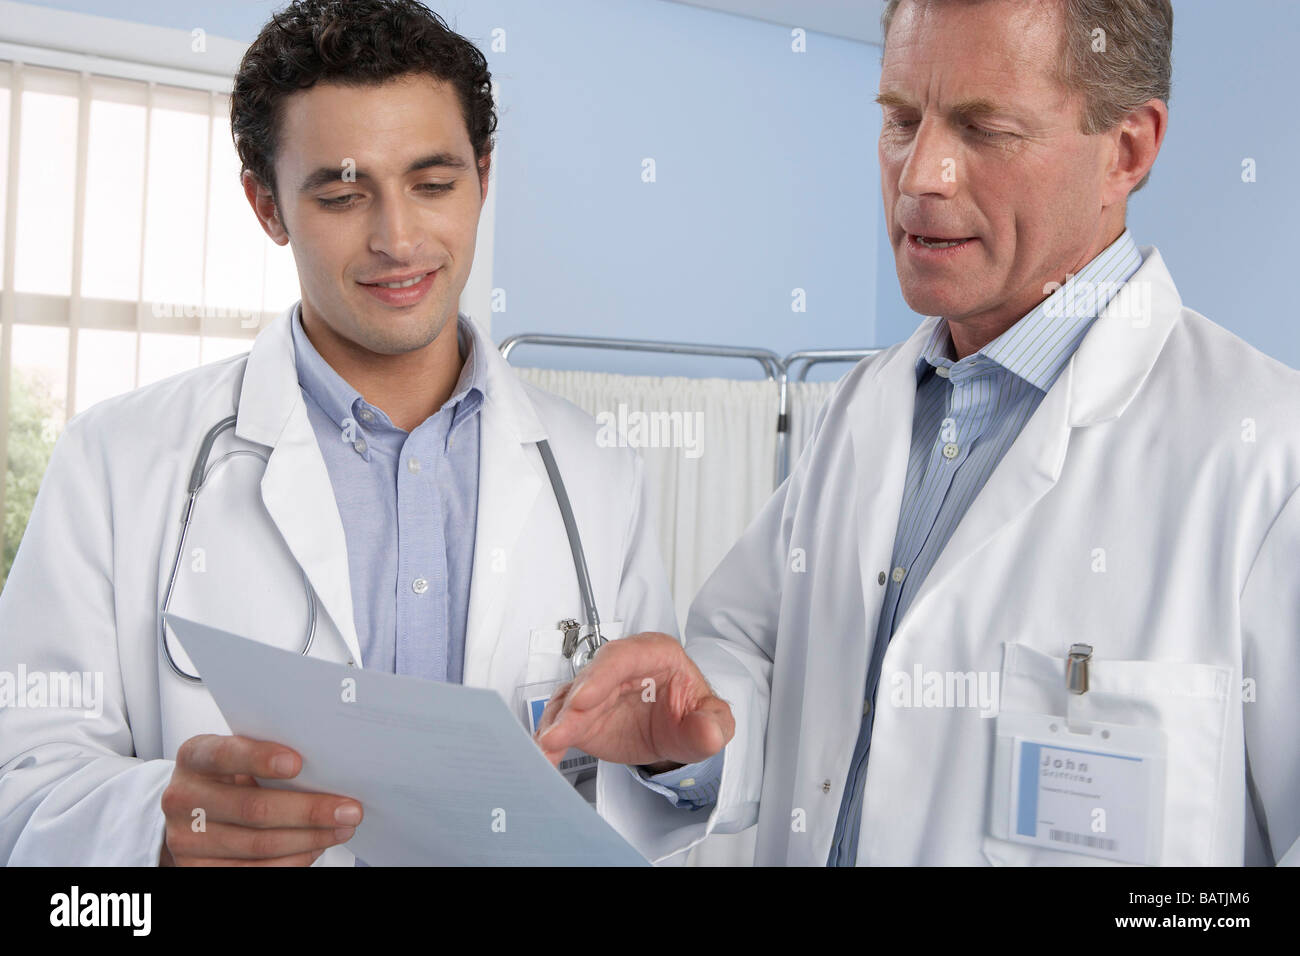 Doctors talking. Two doctors discussing a patient's medical records. Stock Photo